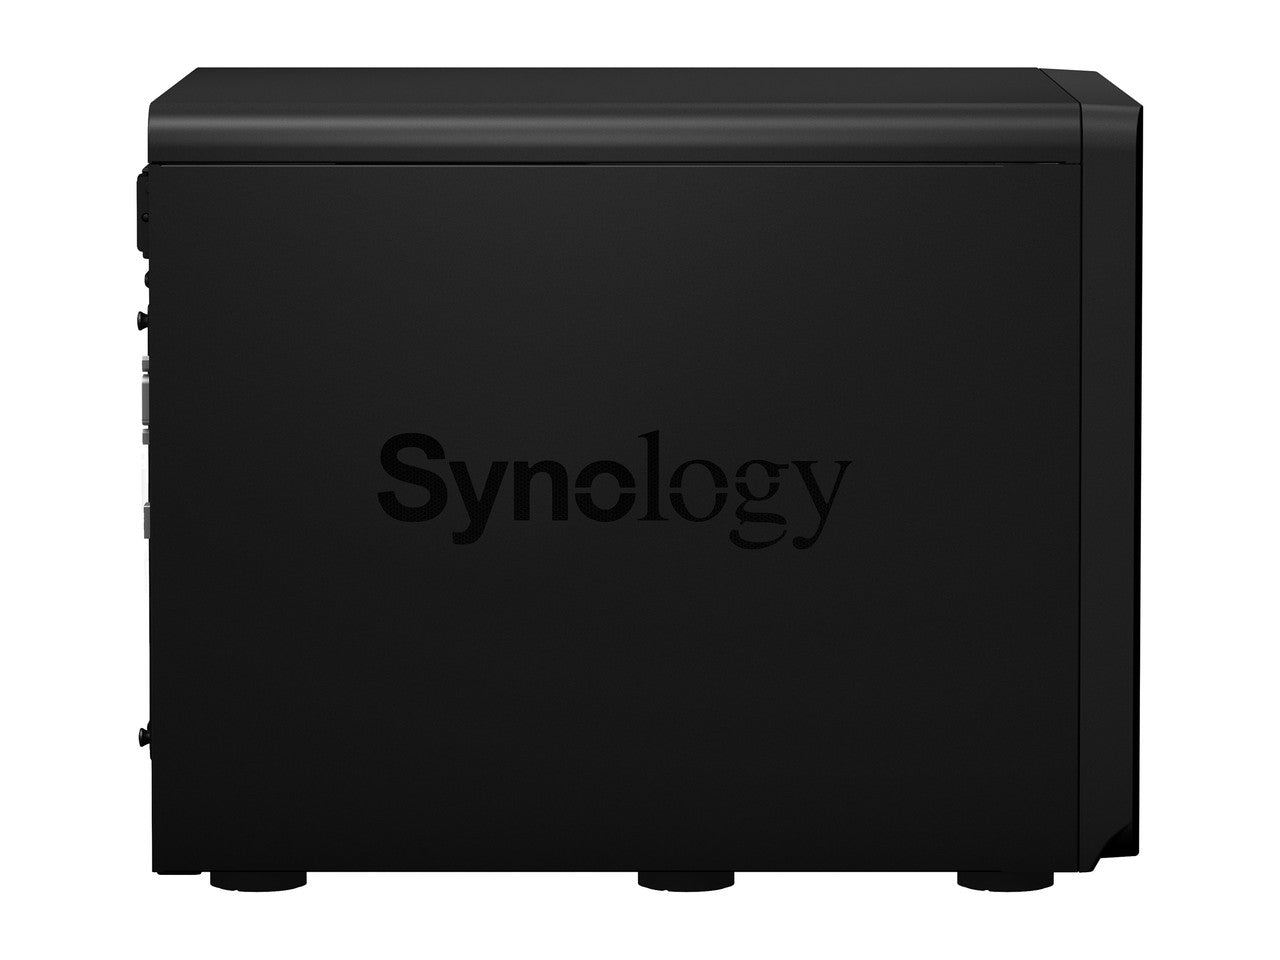 Synology DS2422+ Quad Core 2.2Ghz 12-Bay NAS with E10M20 10GbE Port and 1.6TB (2x800GB) CACHE, 8GB RAM and 192TB (12 x 16TB) of Synology Enterprise Drives